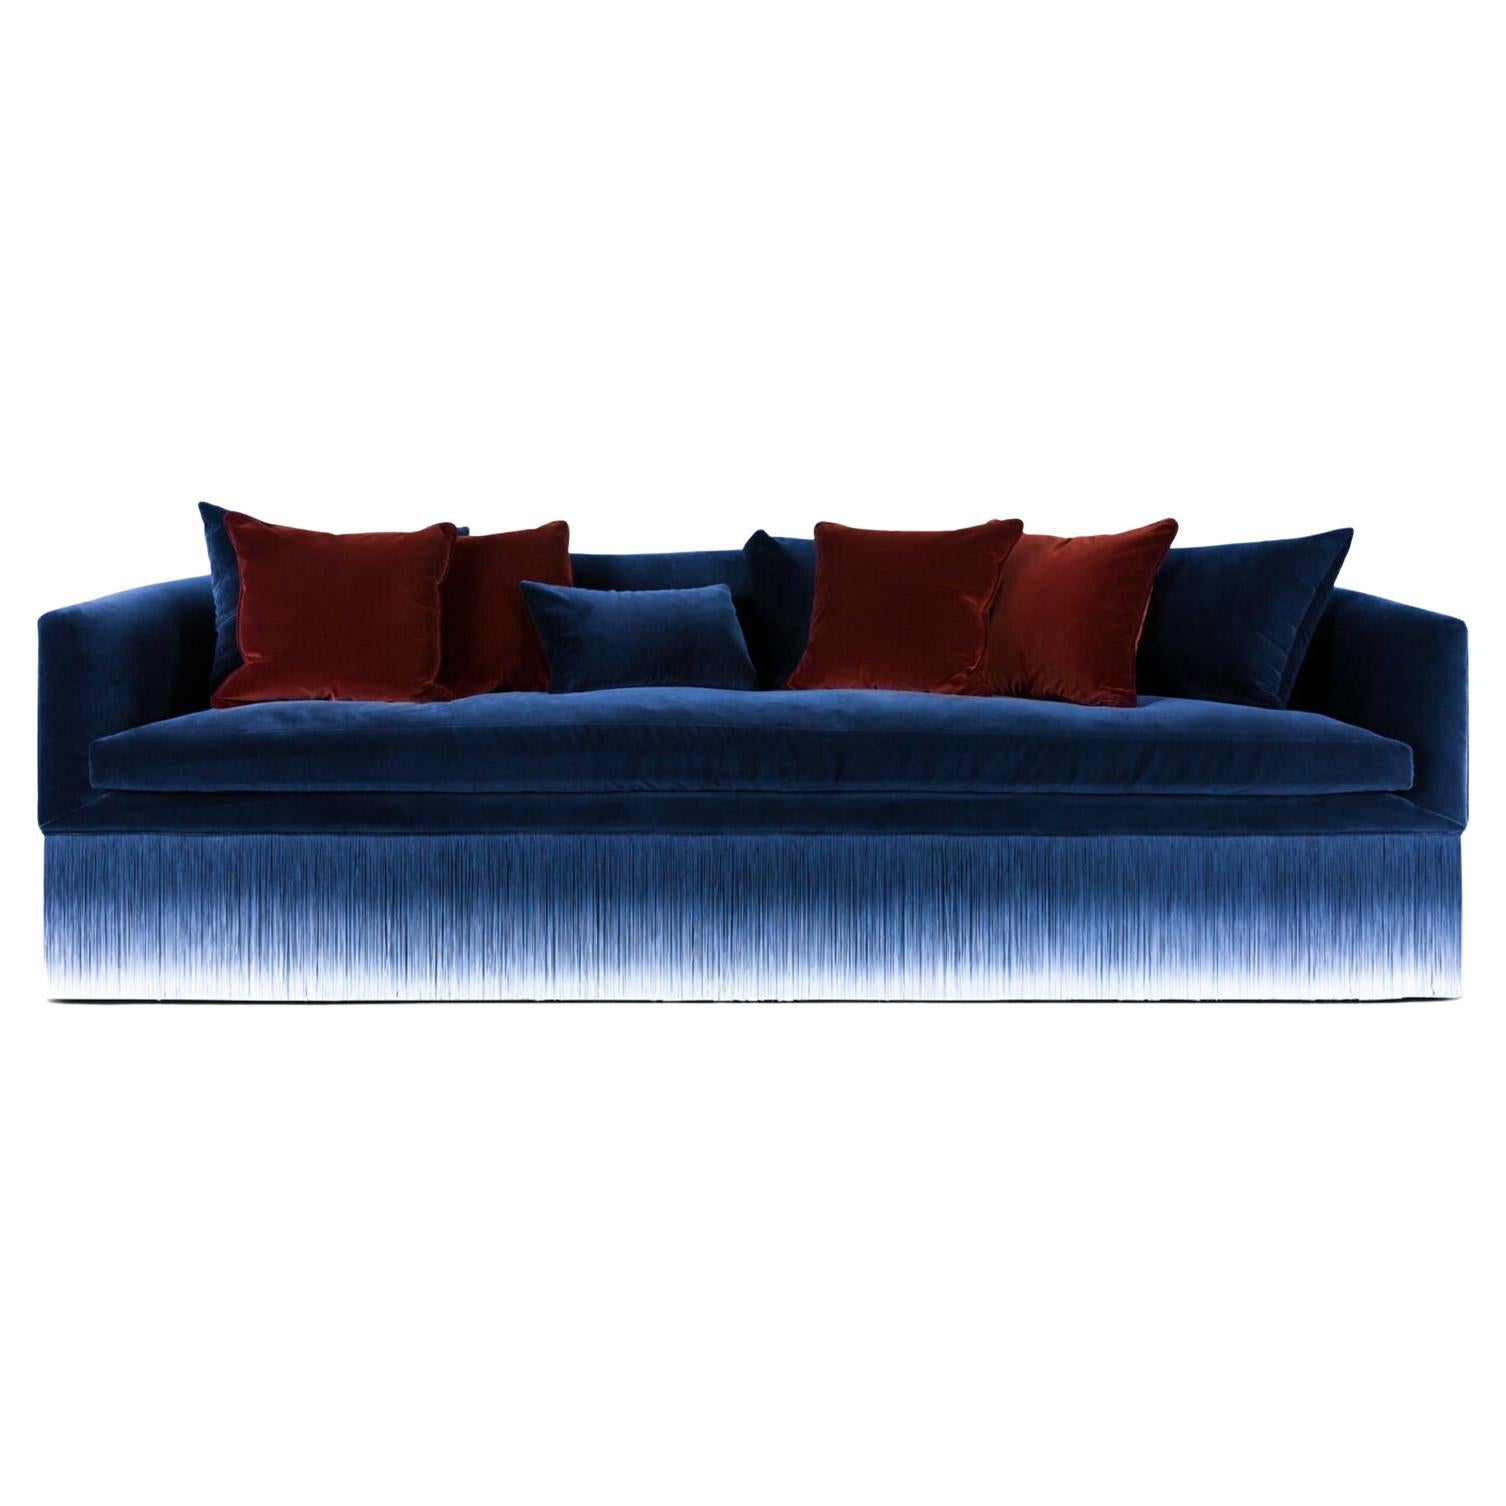 Moooi Amami Sofa with Fringes in Blue Upholstery by Lorenza Bozzoli